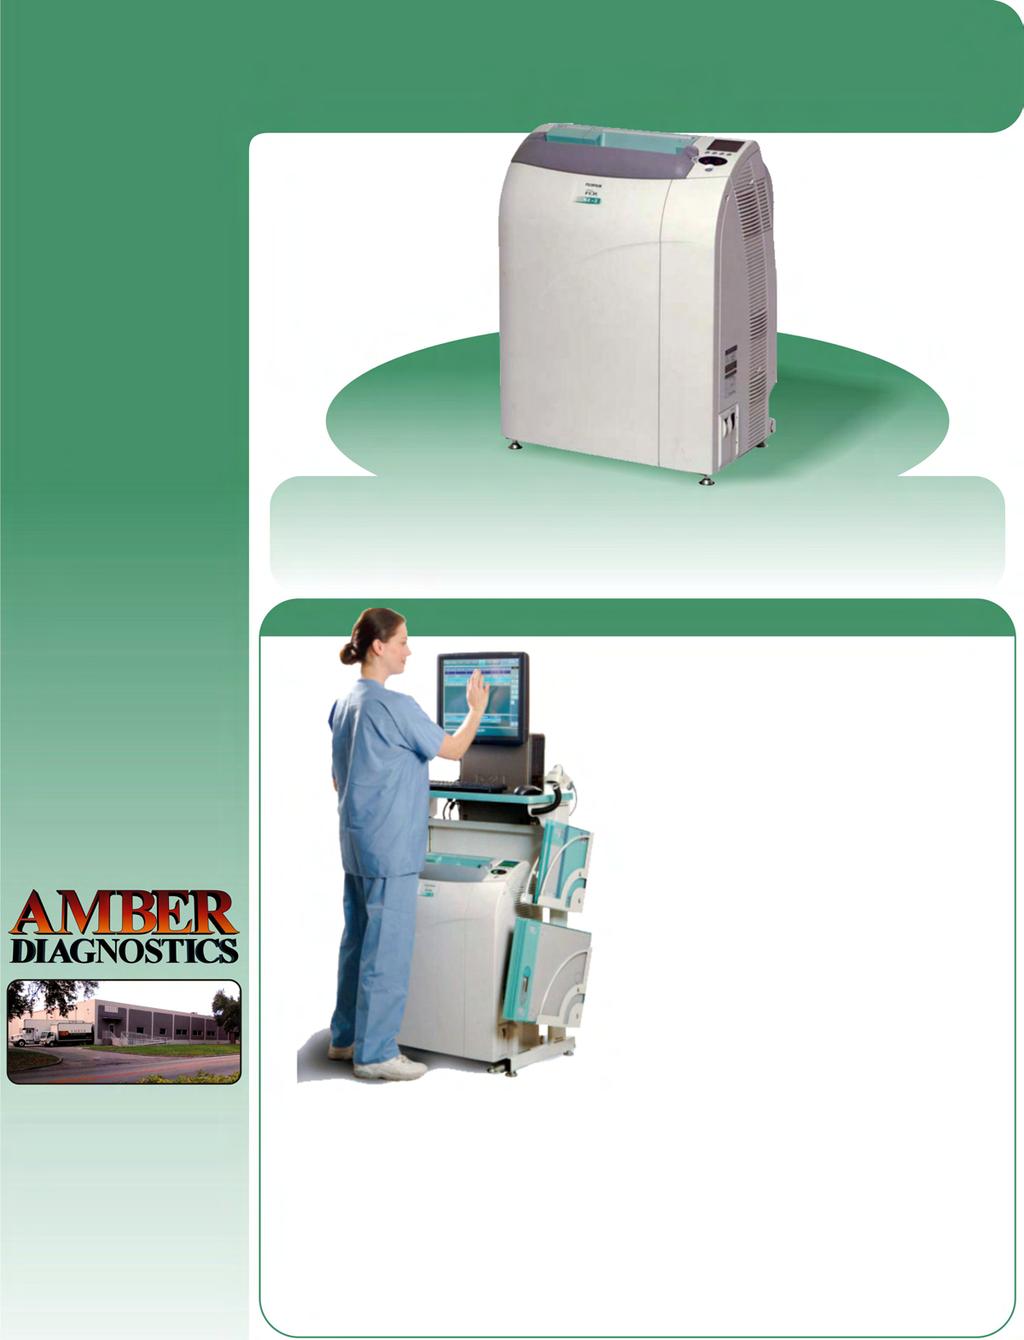 Choose the FCR system that best fits your practice. The FCR XL-2. Perfect for higher-volume environments.